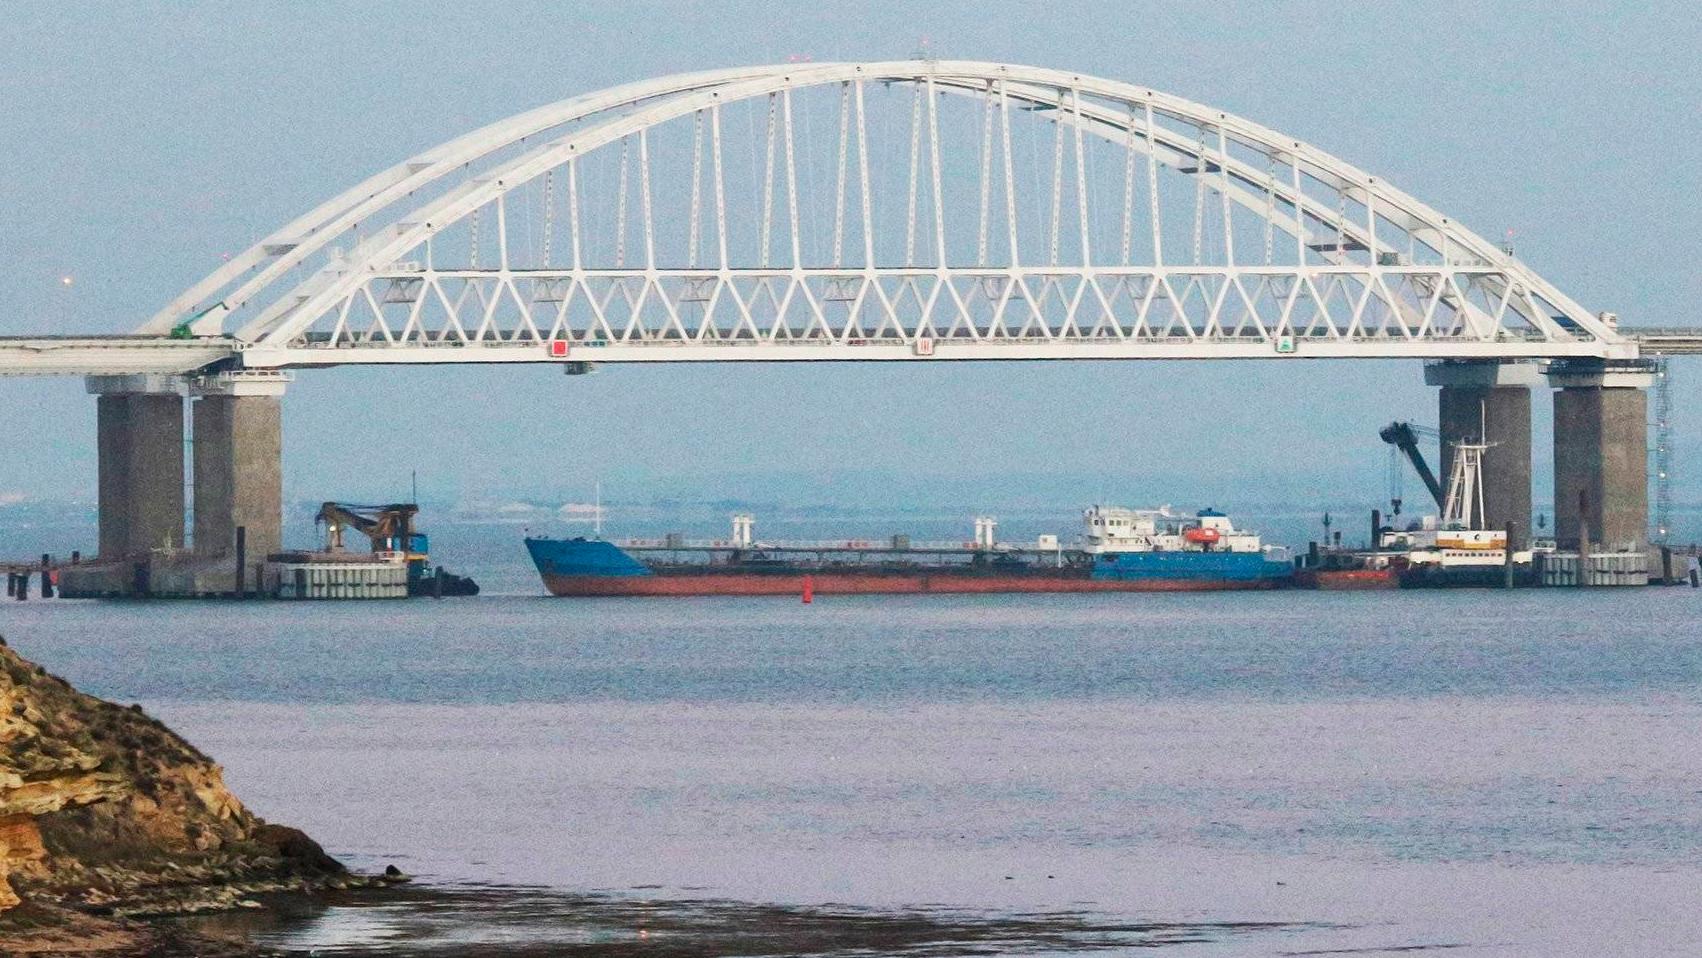 5711849 25.11.2018 A cargo ship blocks a passage under the arch of the Crimean bridge over Kerch Strait in Russia, November 25, 2018. On Sunday Russian authorities closed off the Kerch Strait after three Ukrainian naval ships had crossed the Russian border and entered the temporarily closed area of the Russian territorial waters. Andrej Krylov / Sputnik  via AP